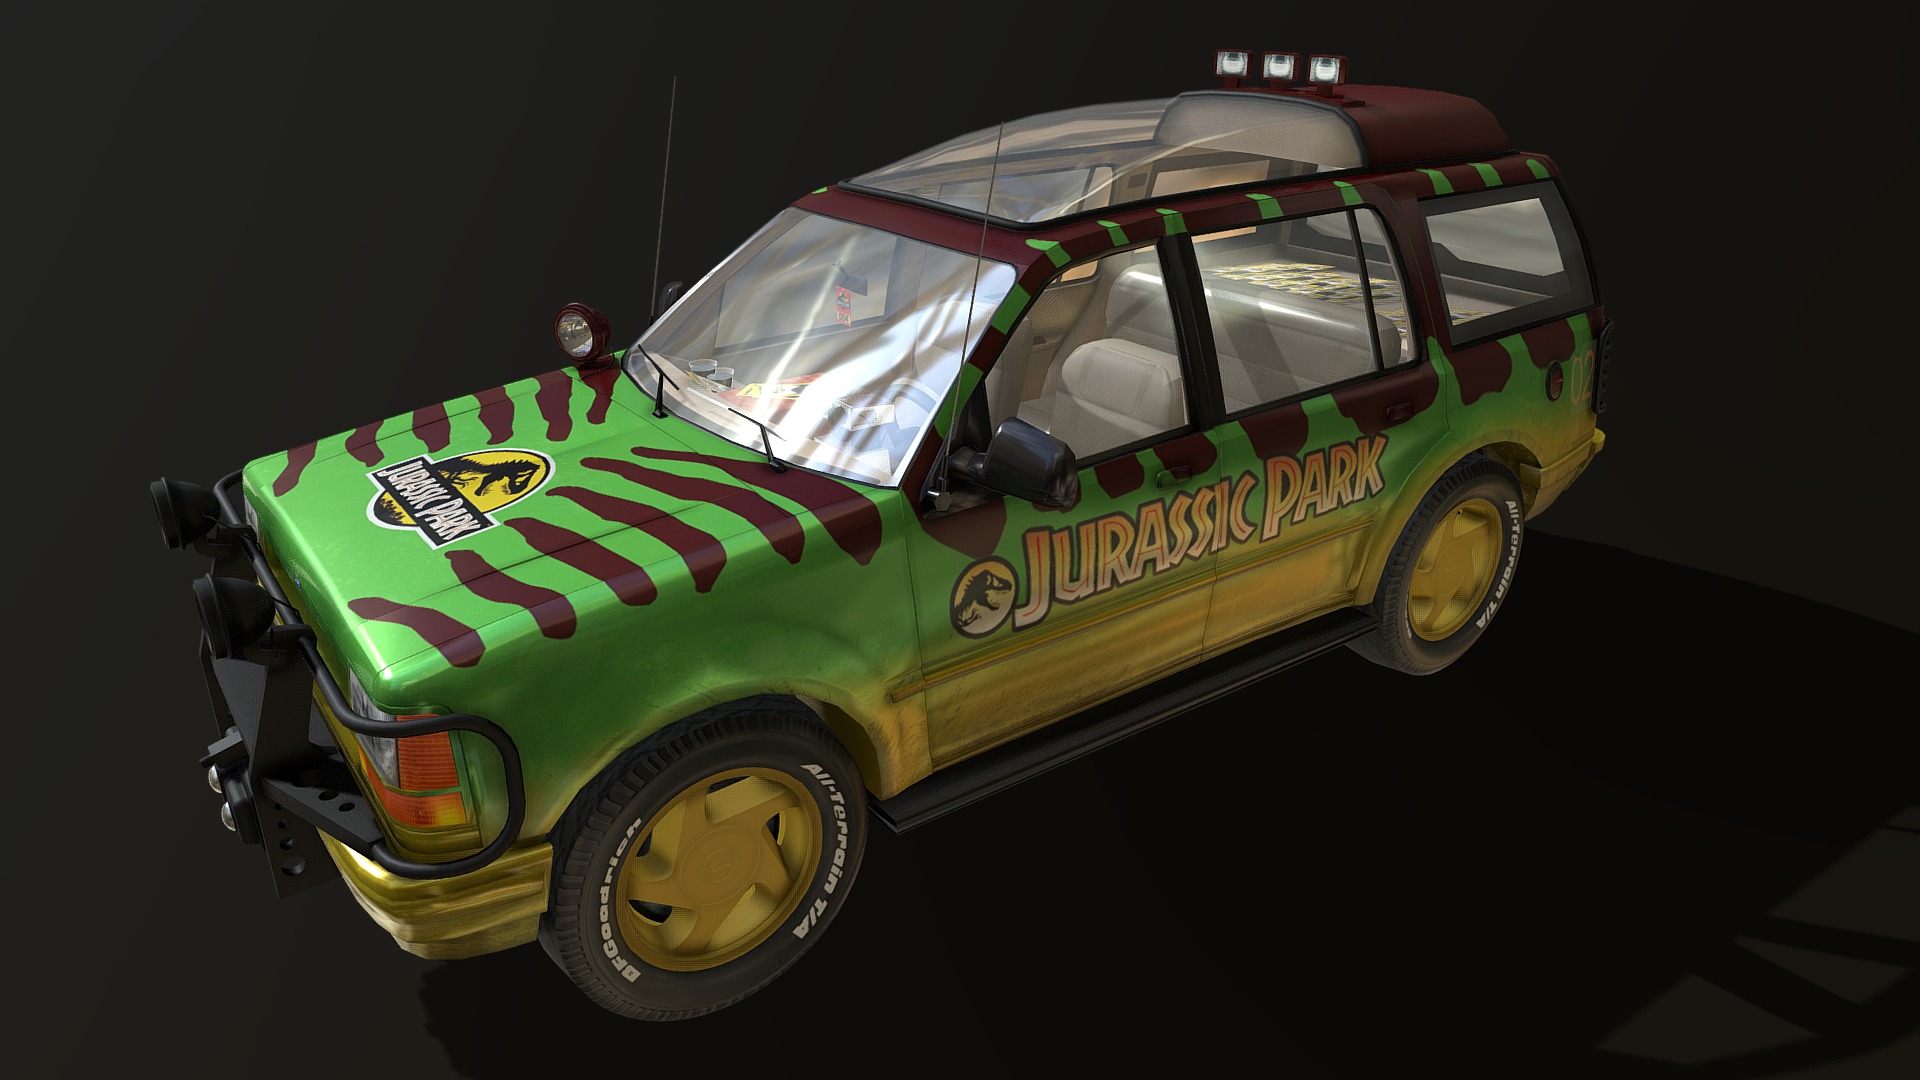 3D model Explorer Jurassic Park Tour Car - This is a 3D model of the Explorer Jurassic Park Tour Car. The 3D model is about a green and yellow car.